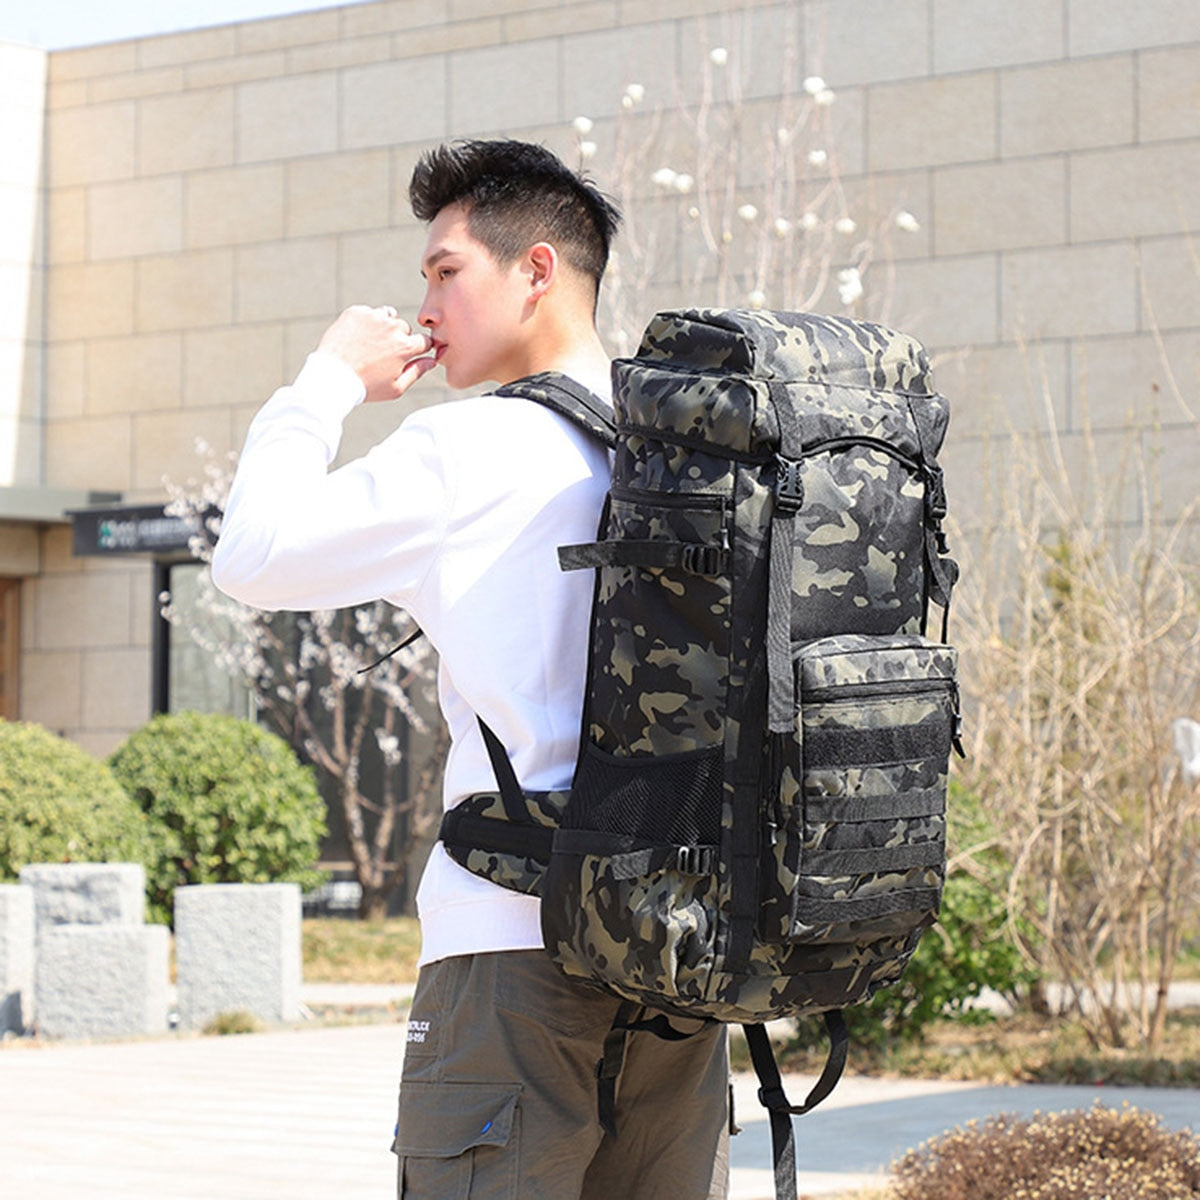 Waterproof Outdoor Camping 70L Military Backpack